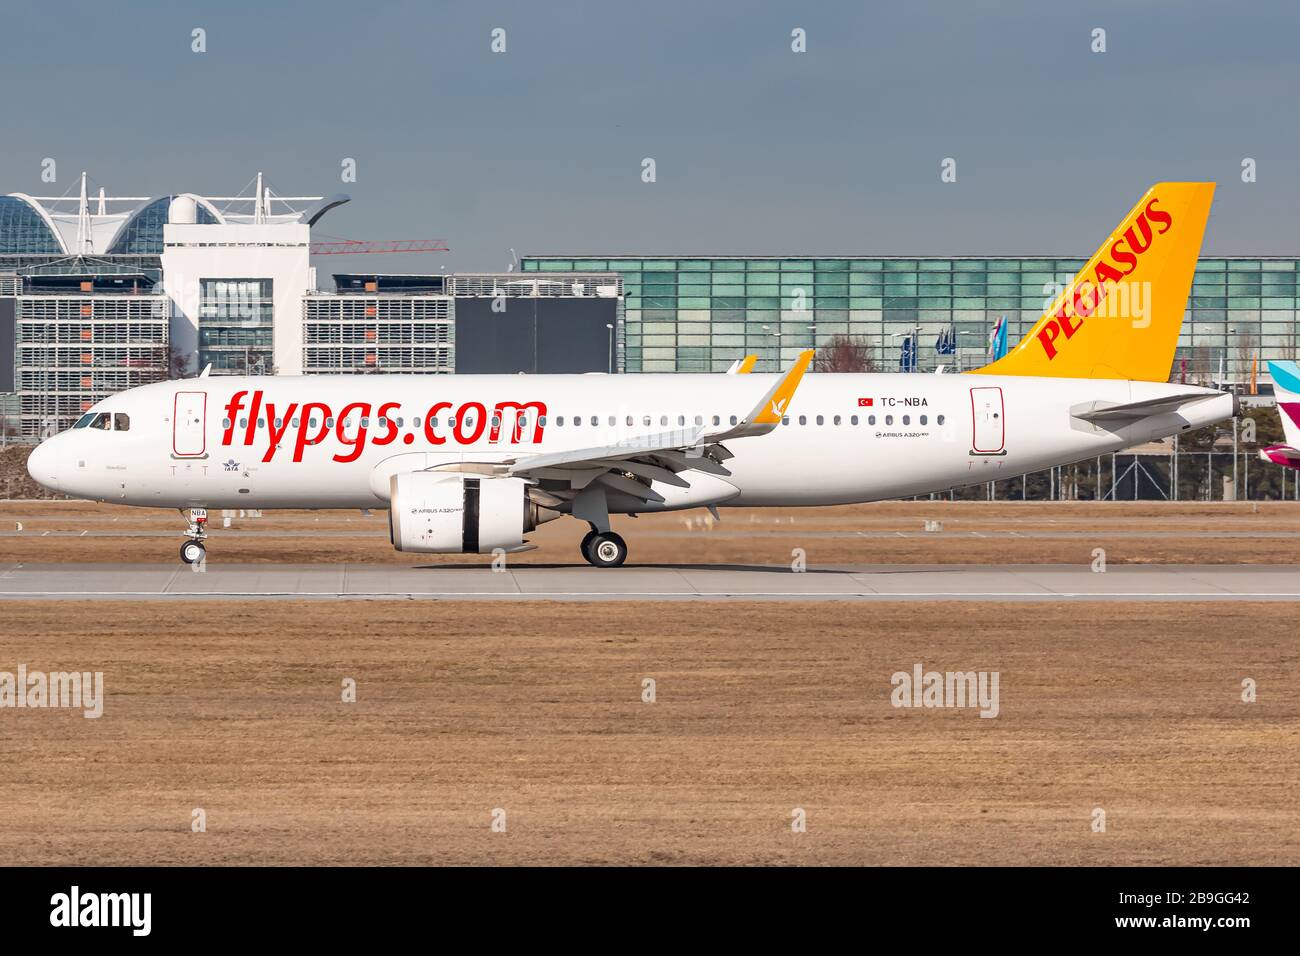 Munich, Germany - February 15, 2020: Pegasus Airlines Airbus A320 Neo airplane at Munich airport (MUC) in Germany. Airbus is an aircraft manufacturer Stock Photo